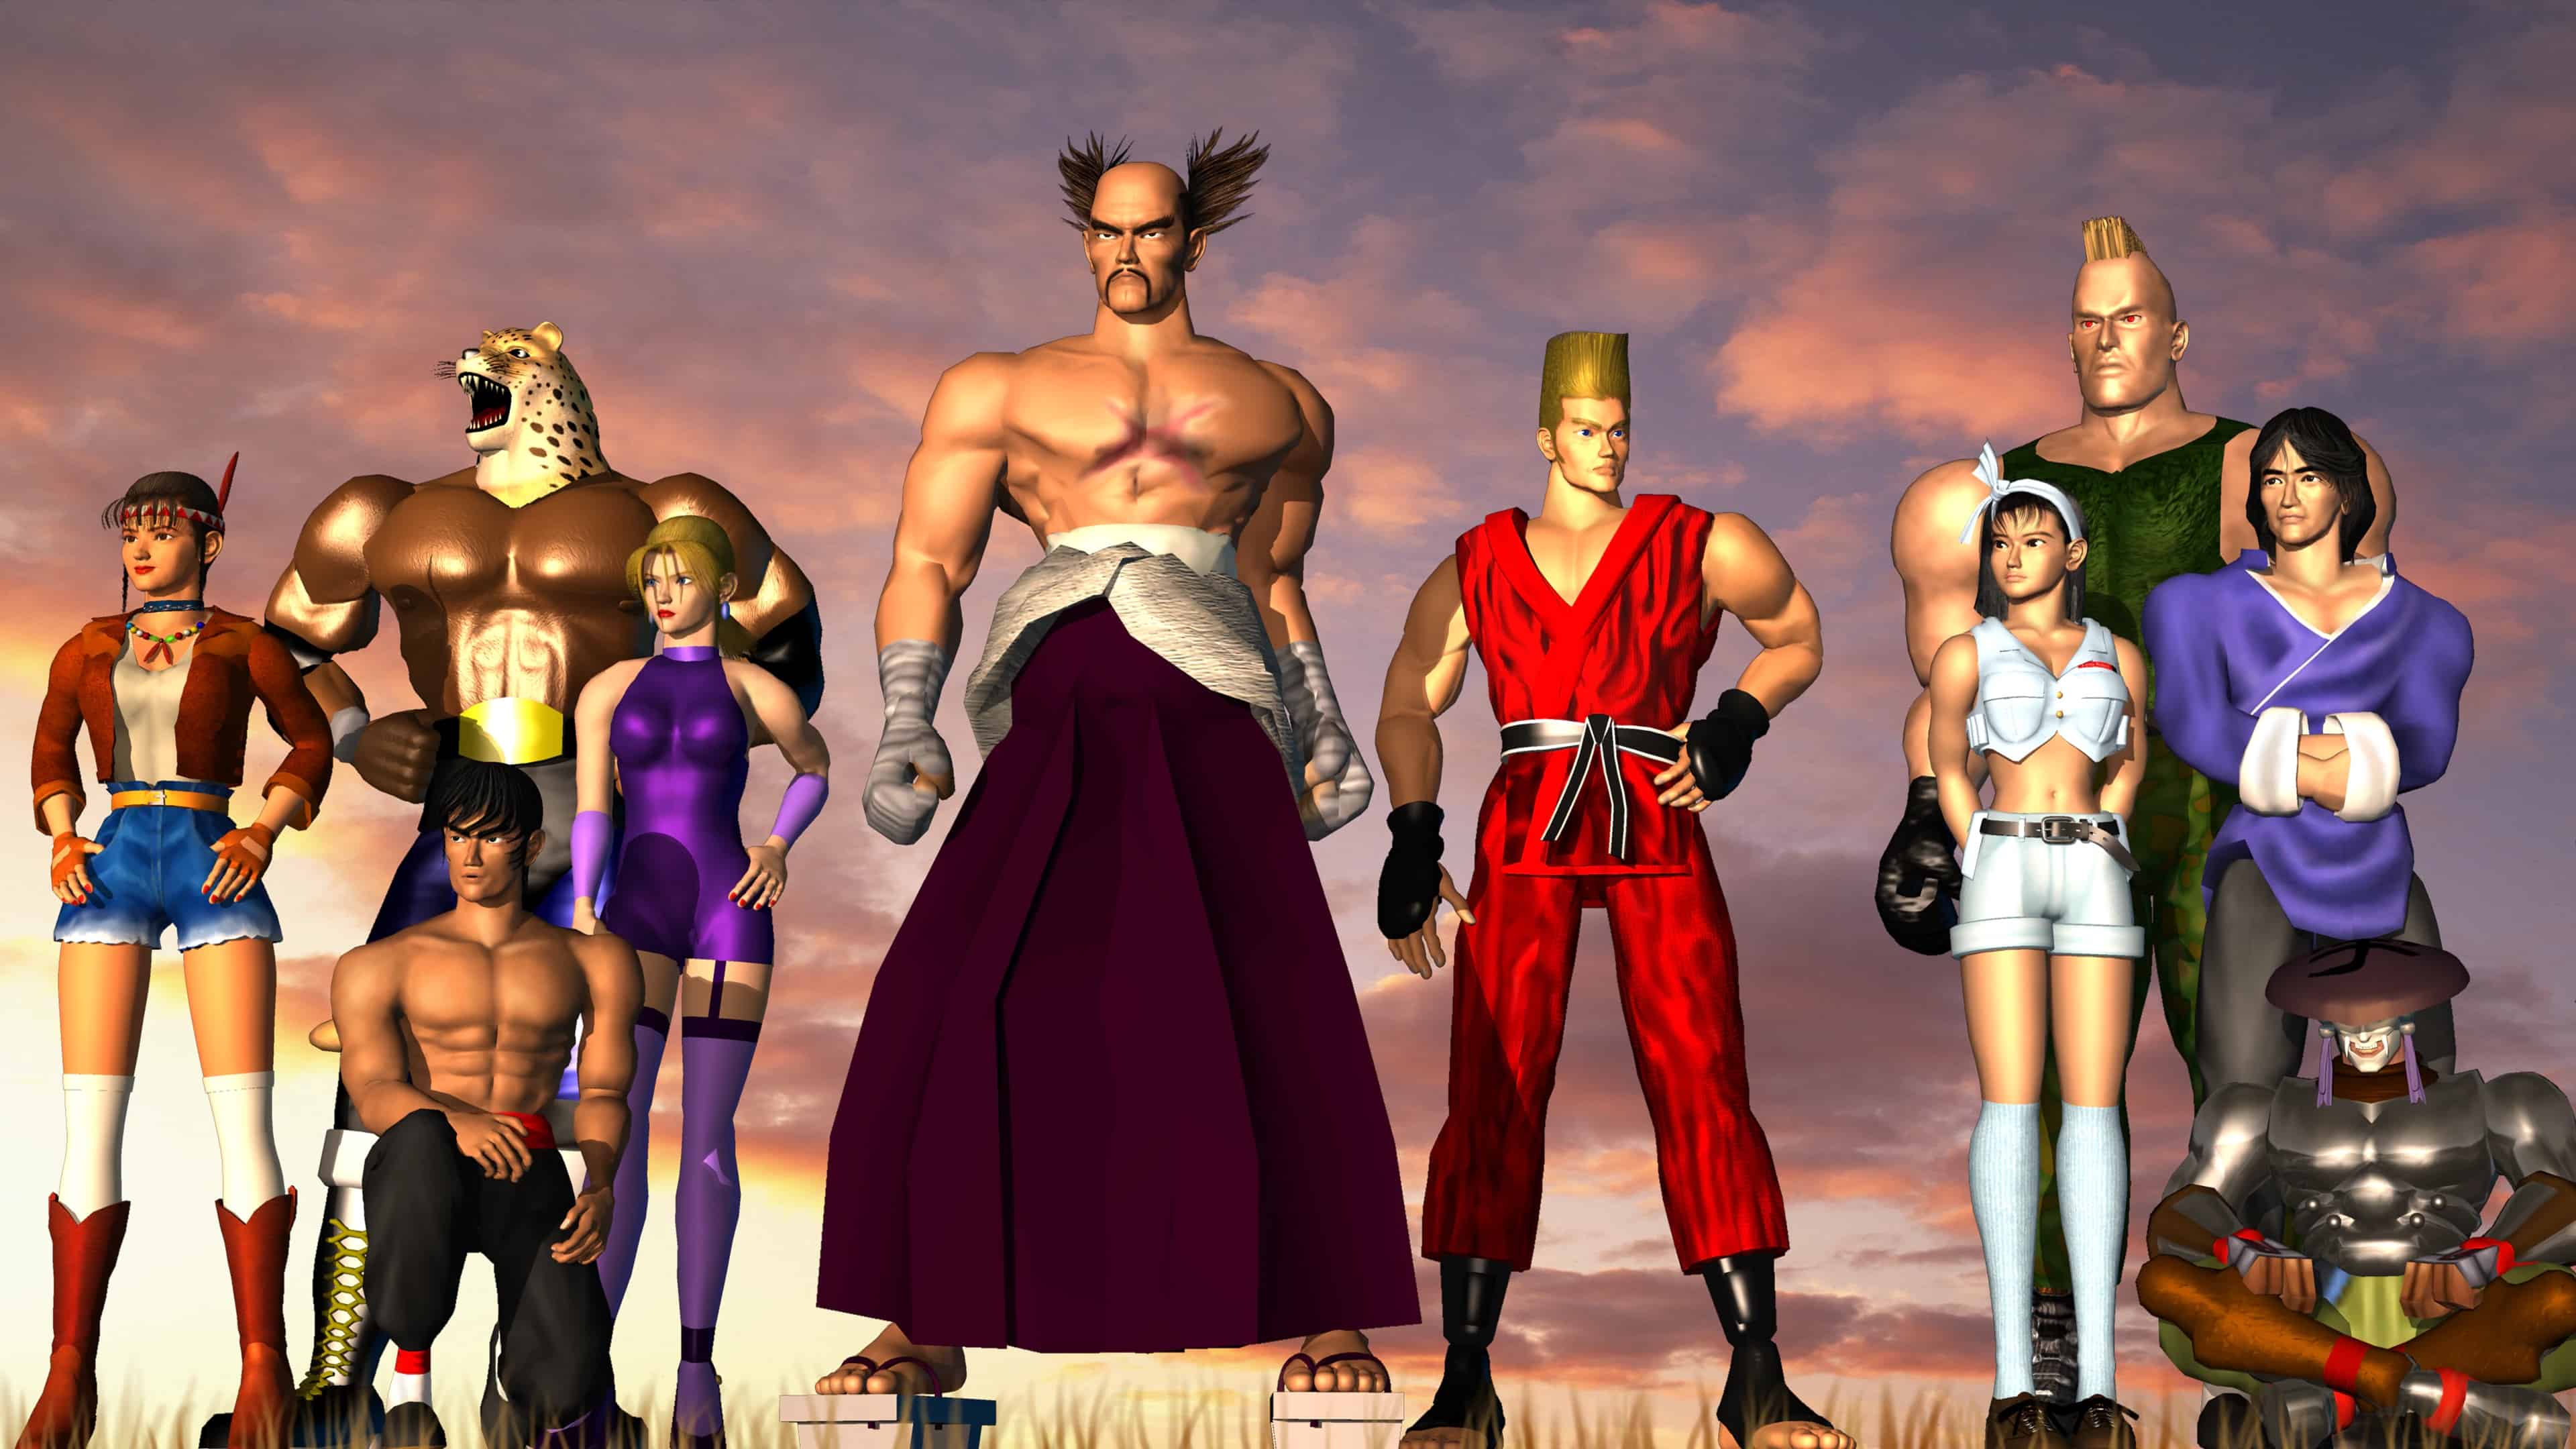 The Best Female Fighters In The History of Video Games - Street Fighter